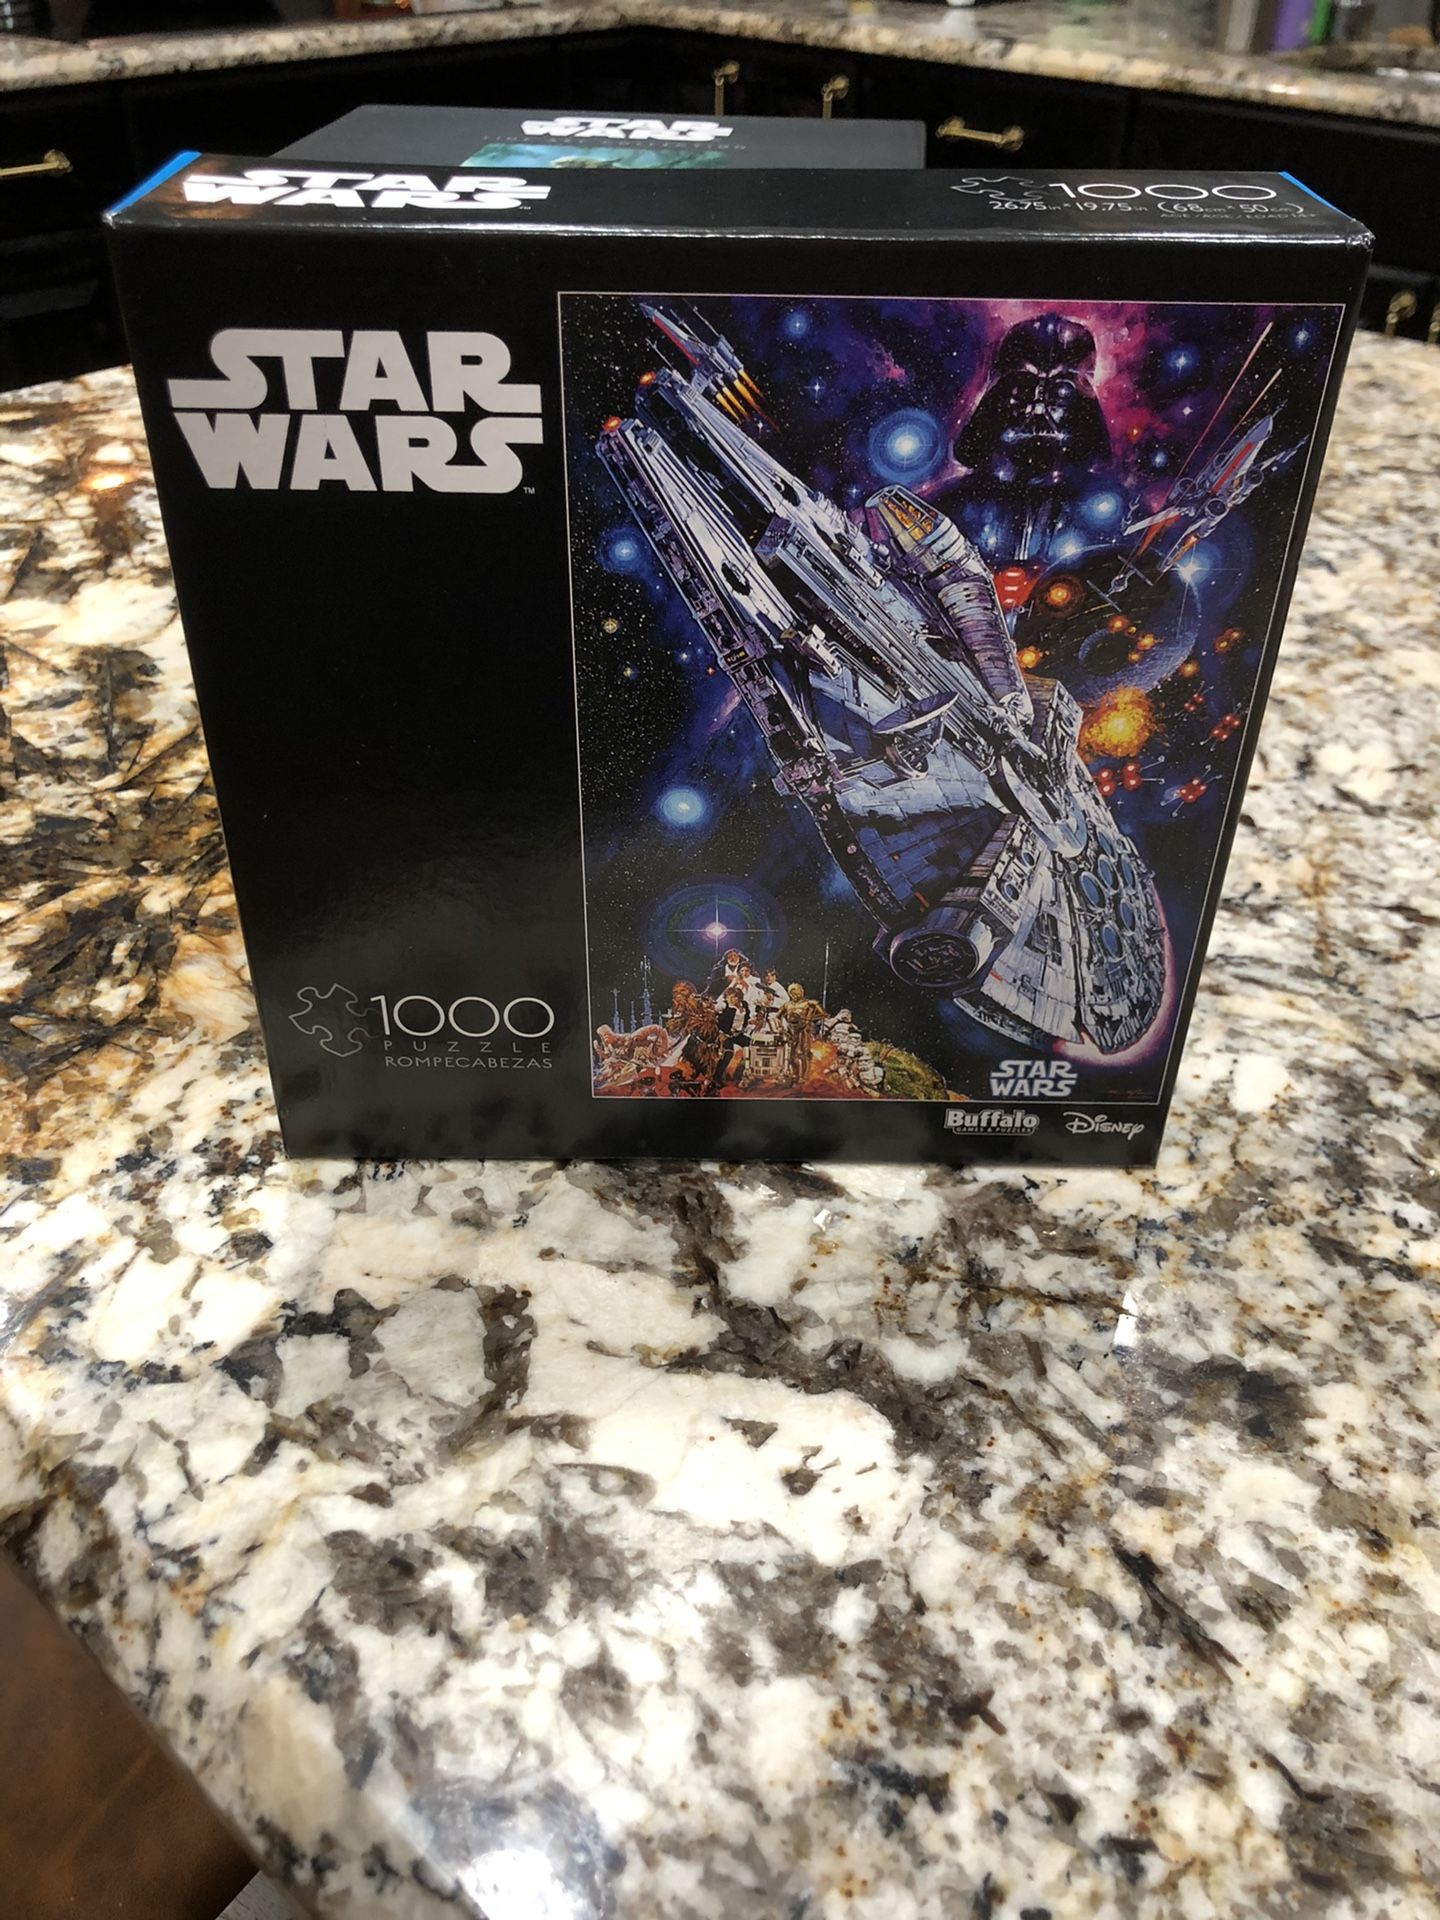 NEW AND SEALED Star Wars Millennium Falcon 1000 Piece Puzzle Buffalo Games